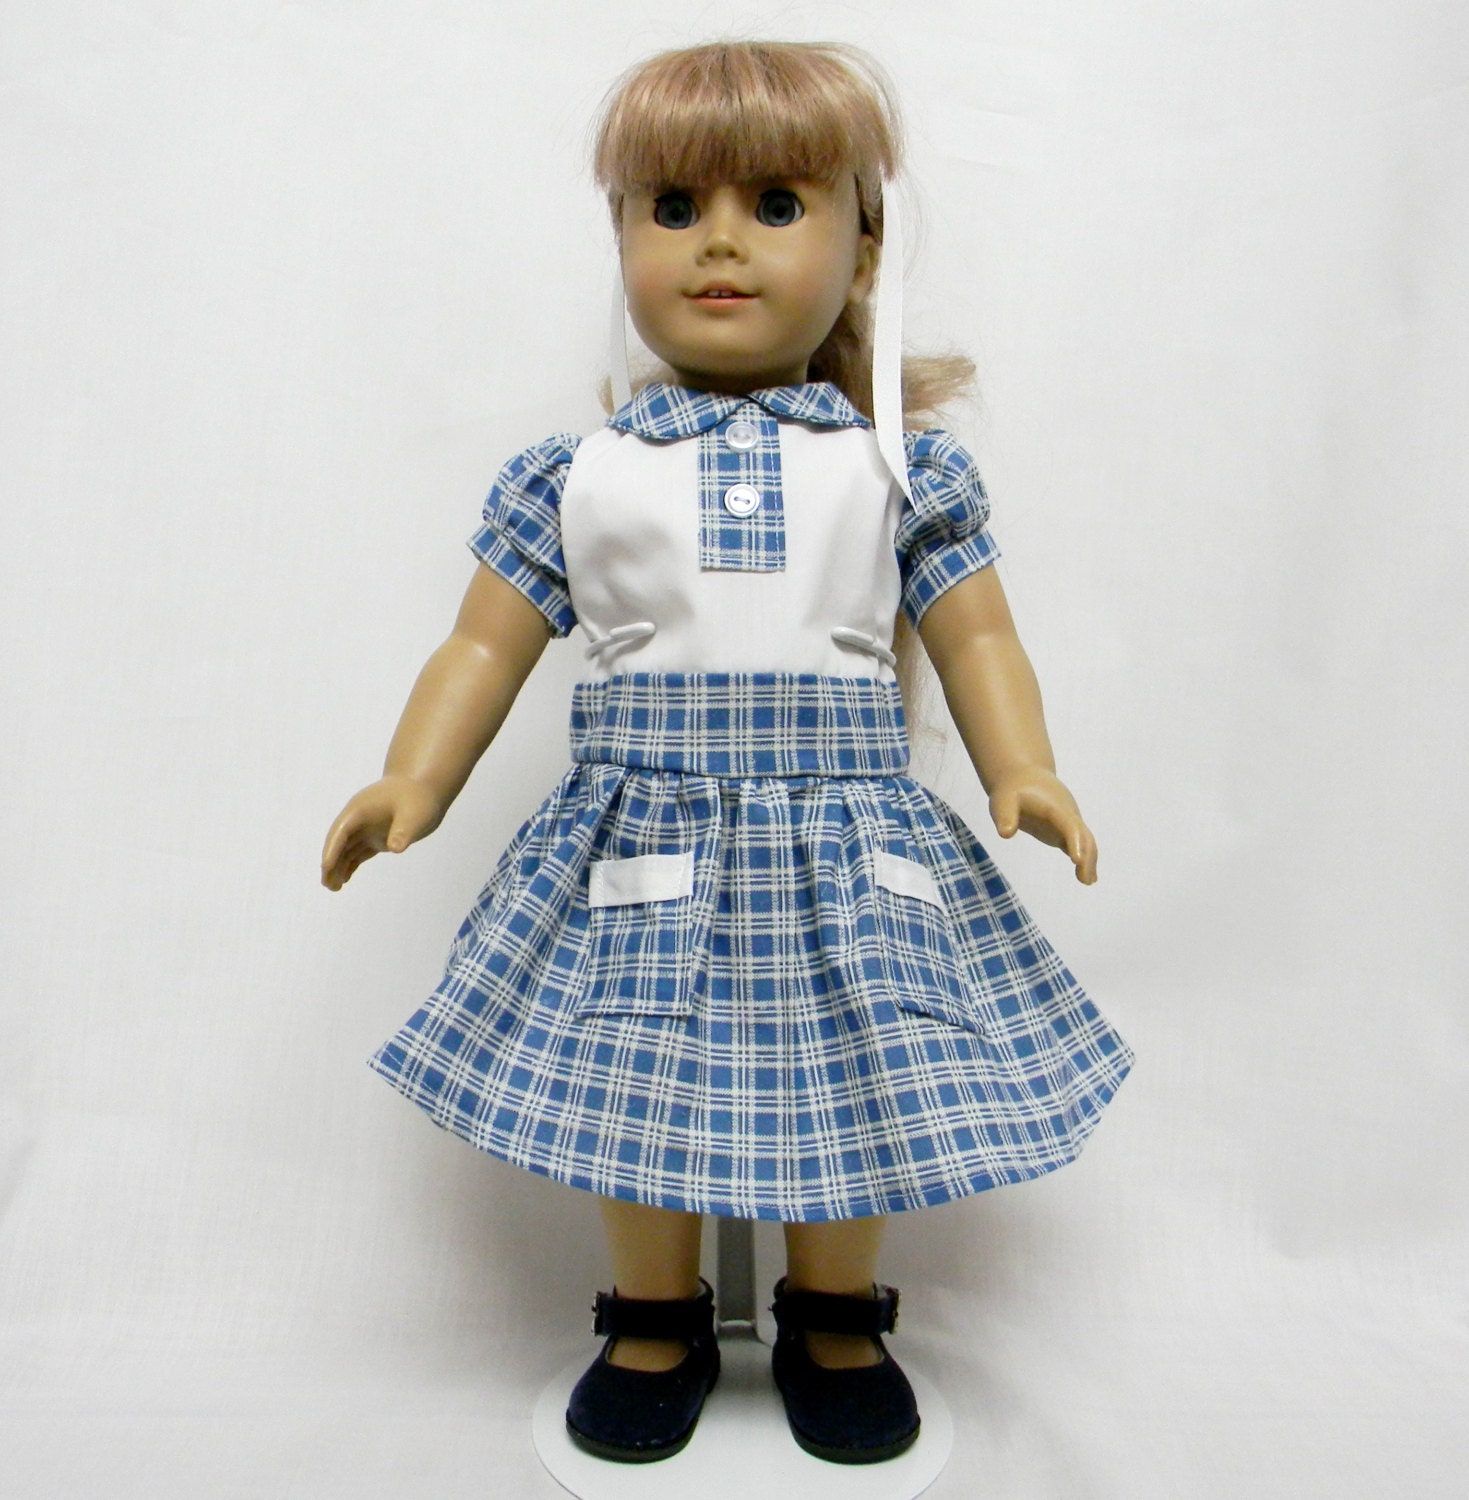 Vintage Blue & White Check Dress For 18 Inch Dolls Like The | Etsy